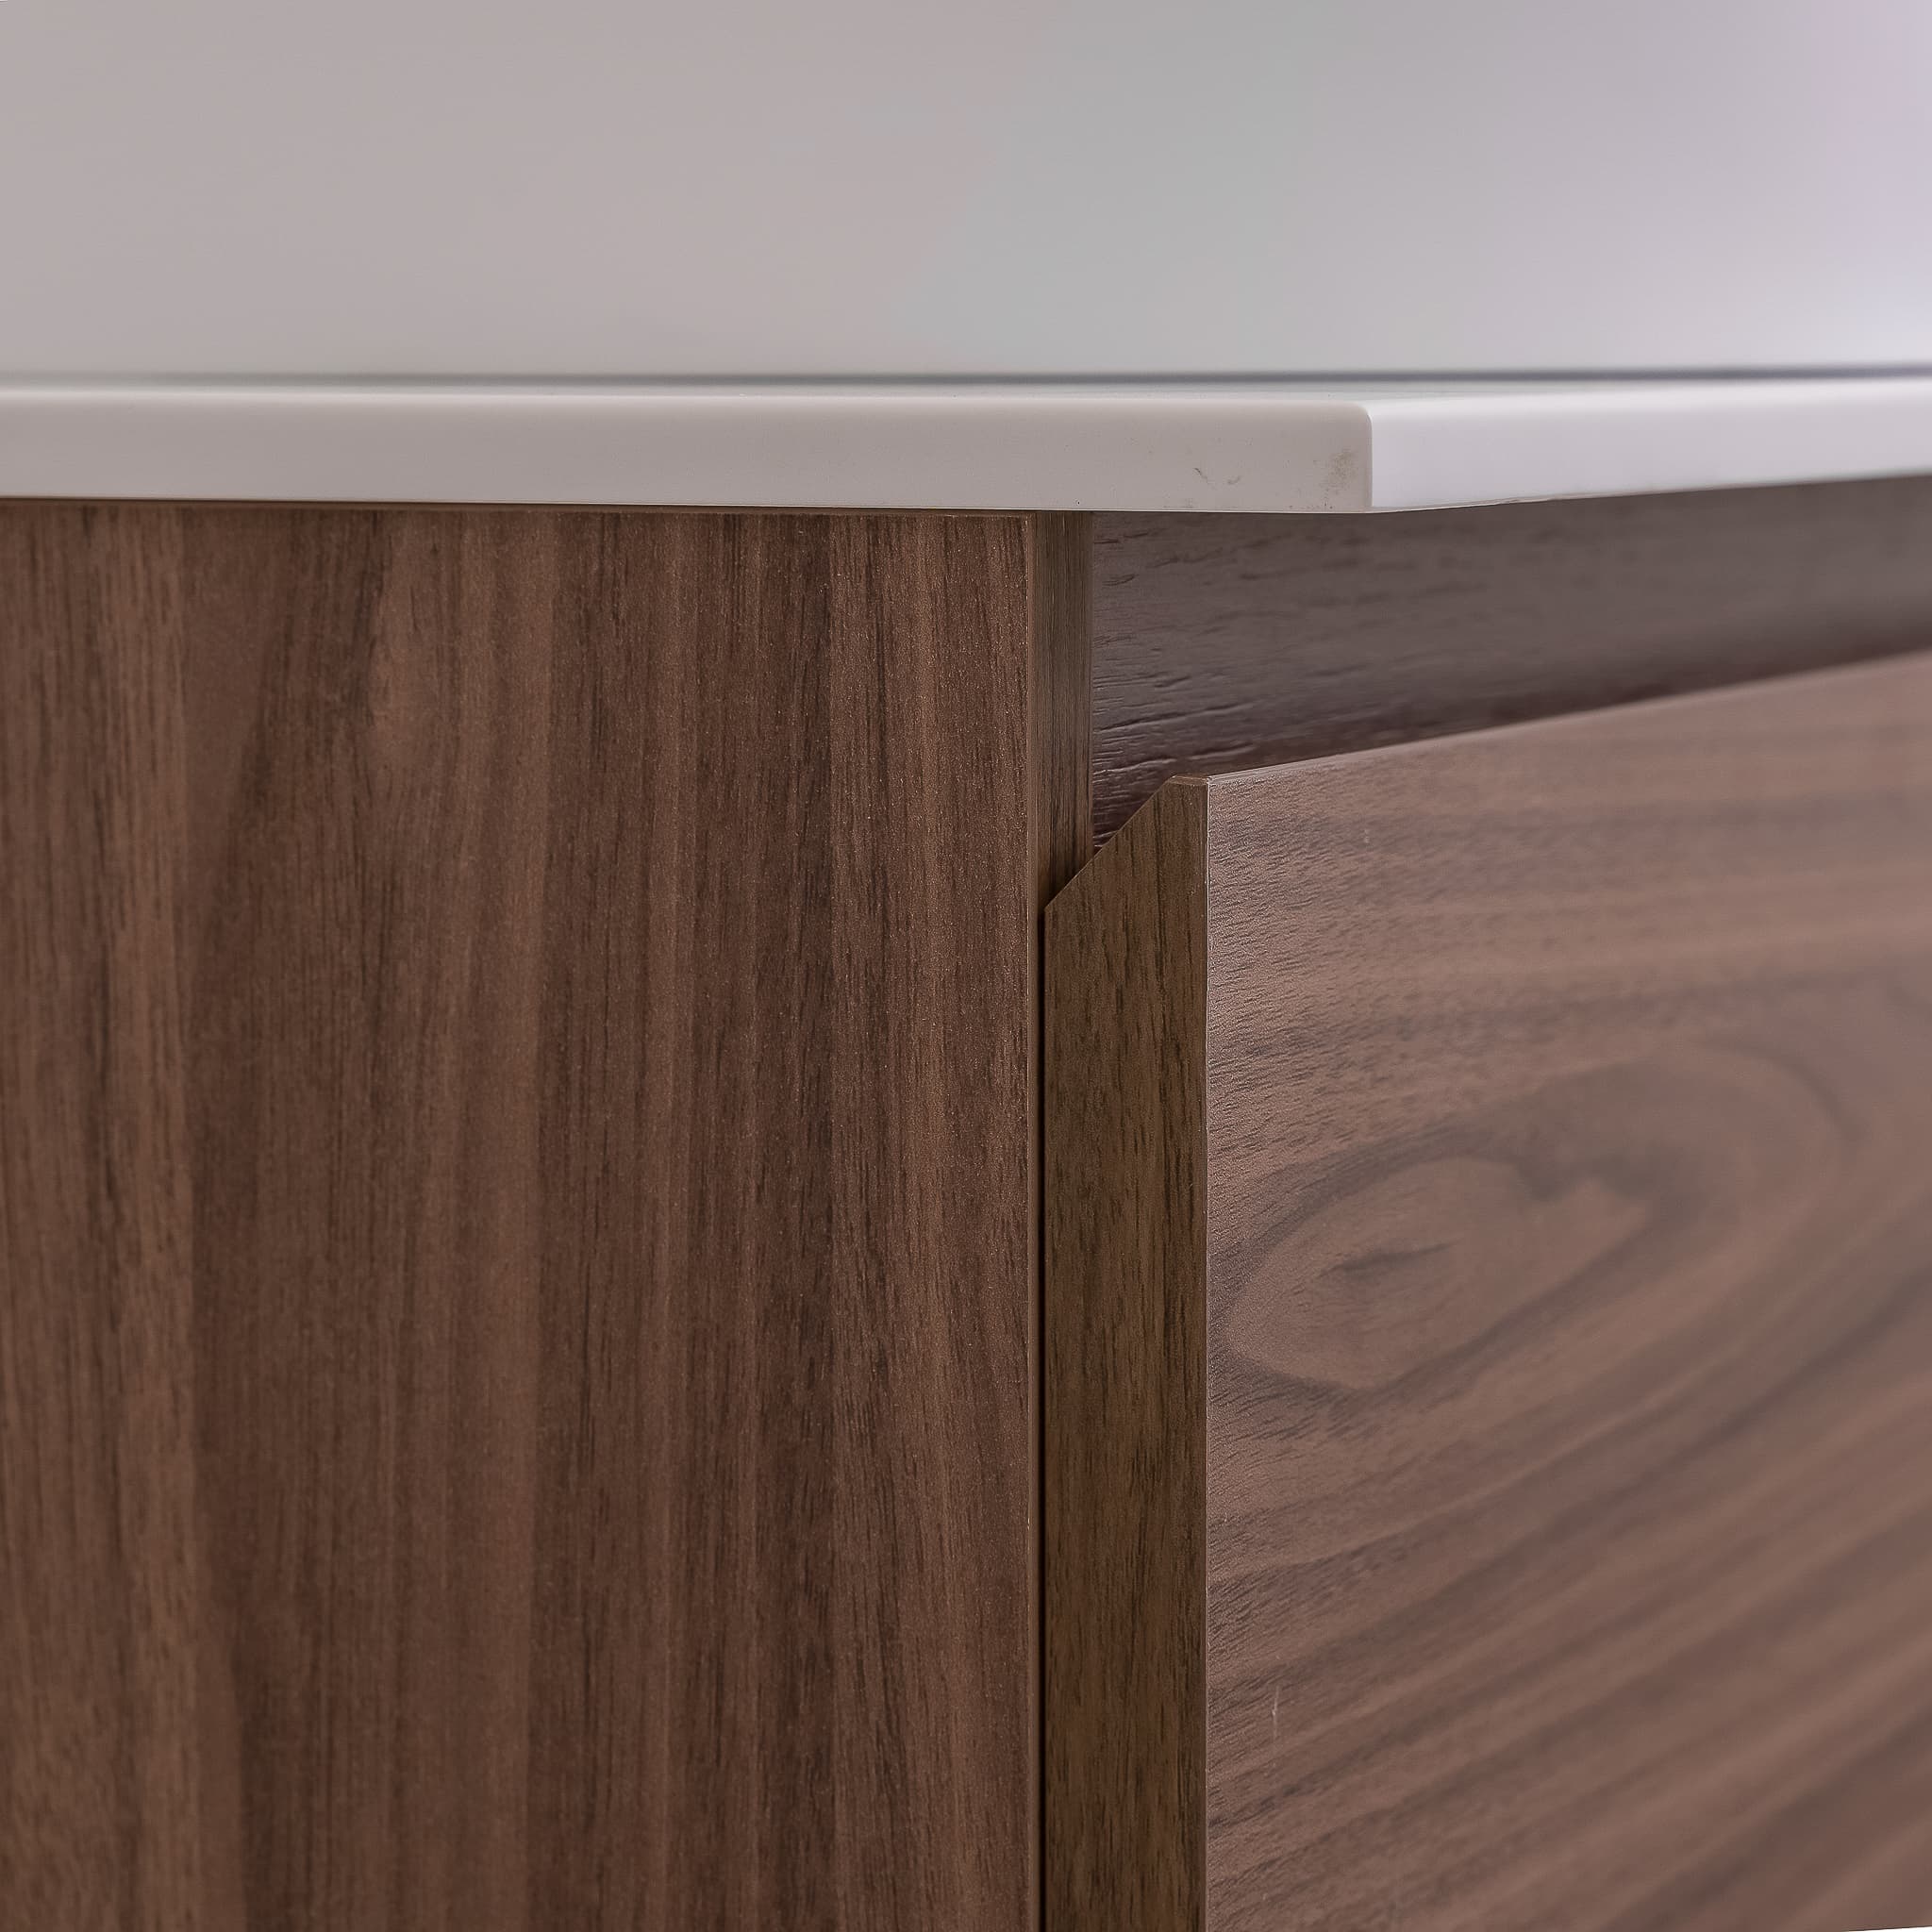 Venice 23.5 Walnut Wood Texture Cabinet, Solid Surface Flat White Counter And Round Solid Surface White Basin 1386, Wall Mounted Modern Vanity Set